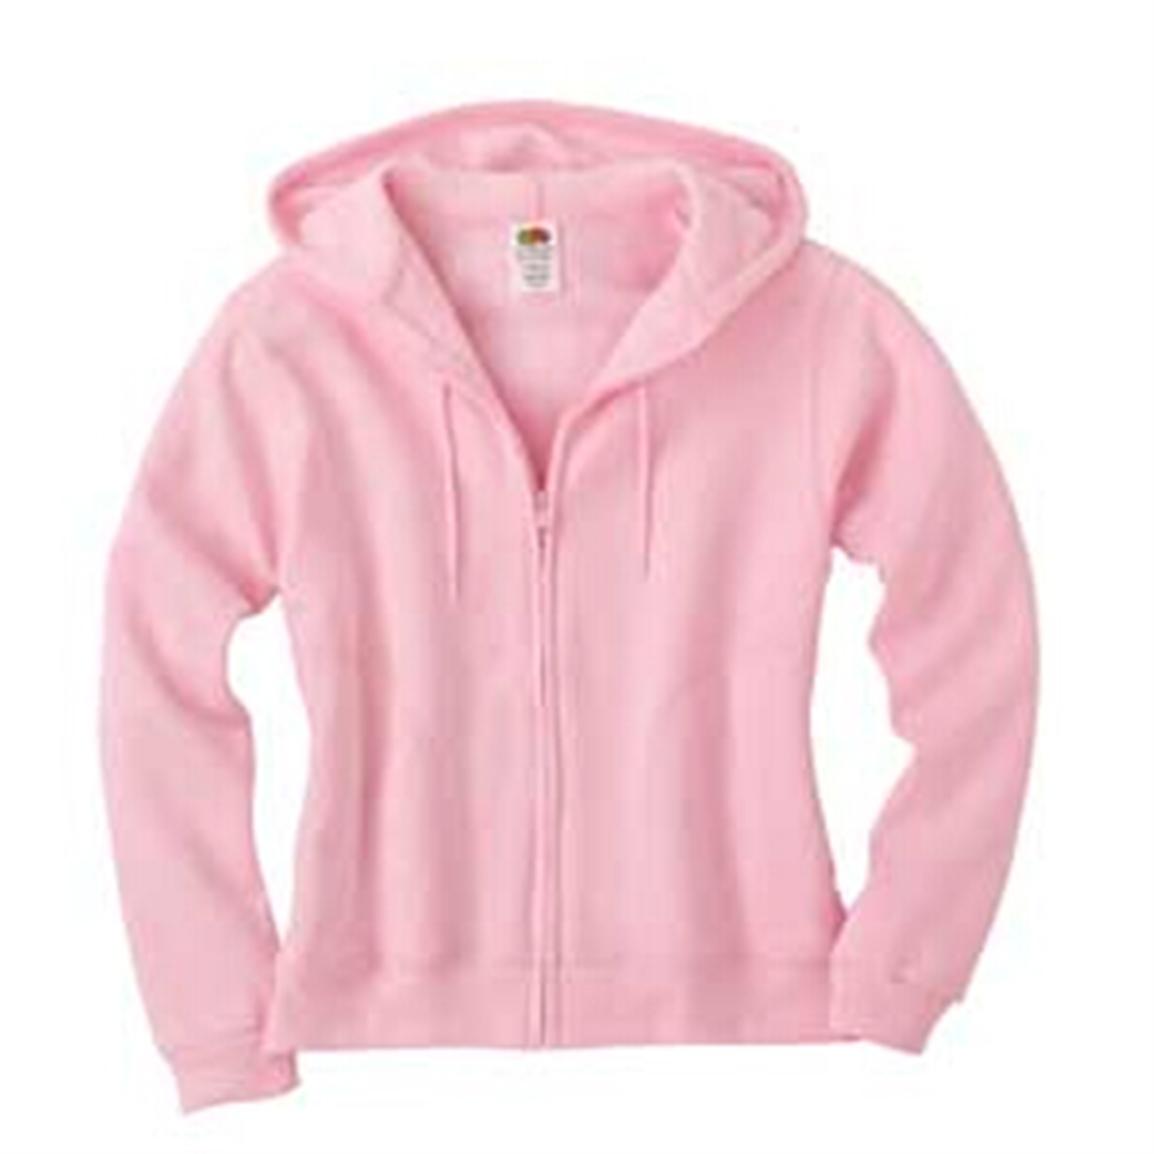 Women's Fruit of the LoomÂ® Just For Herâ¢ Full - Zip Hood Sweatshirt - 189552, Sweatshirts 